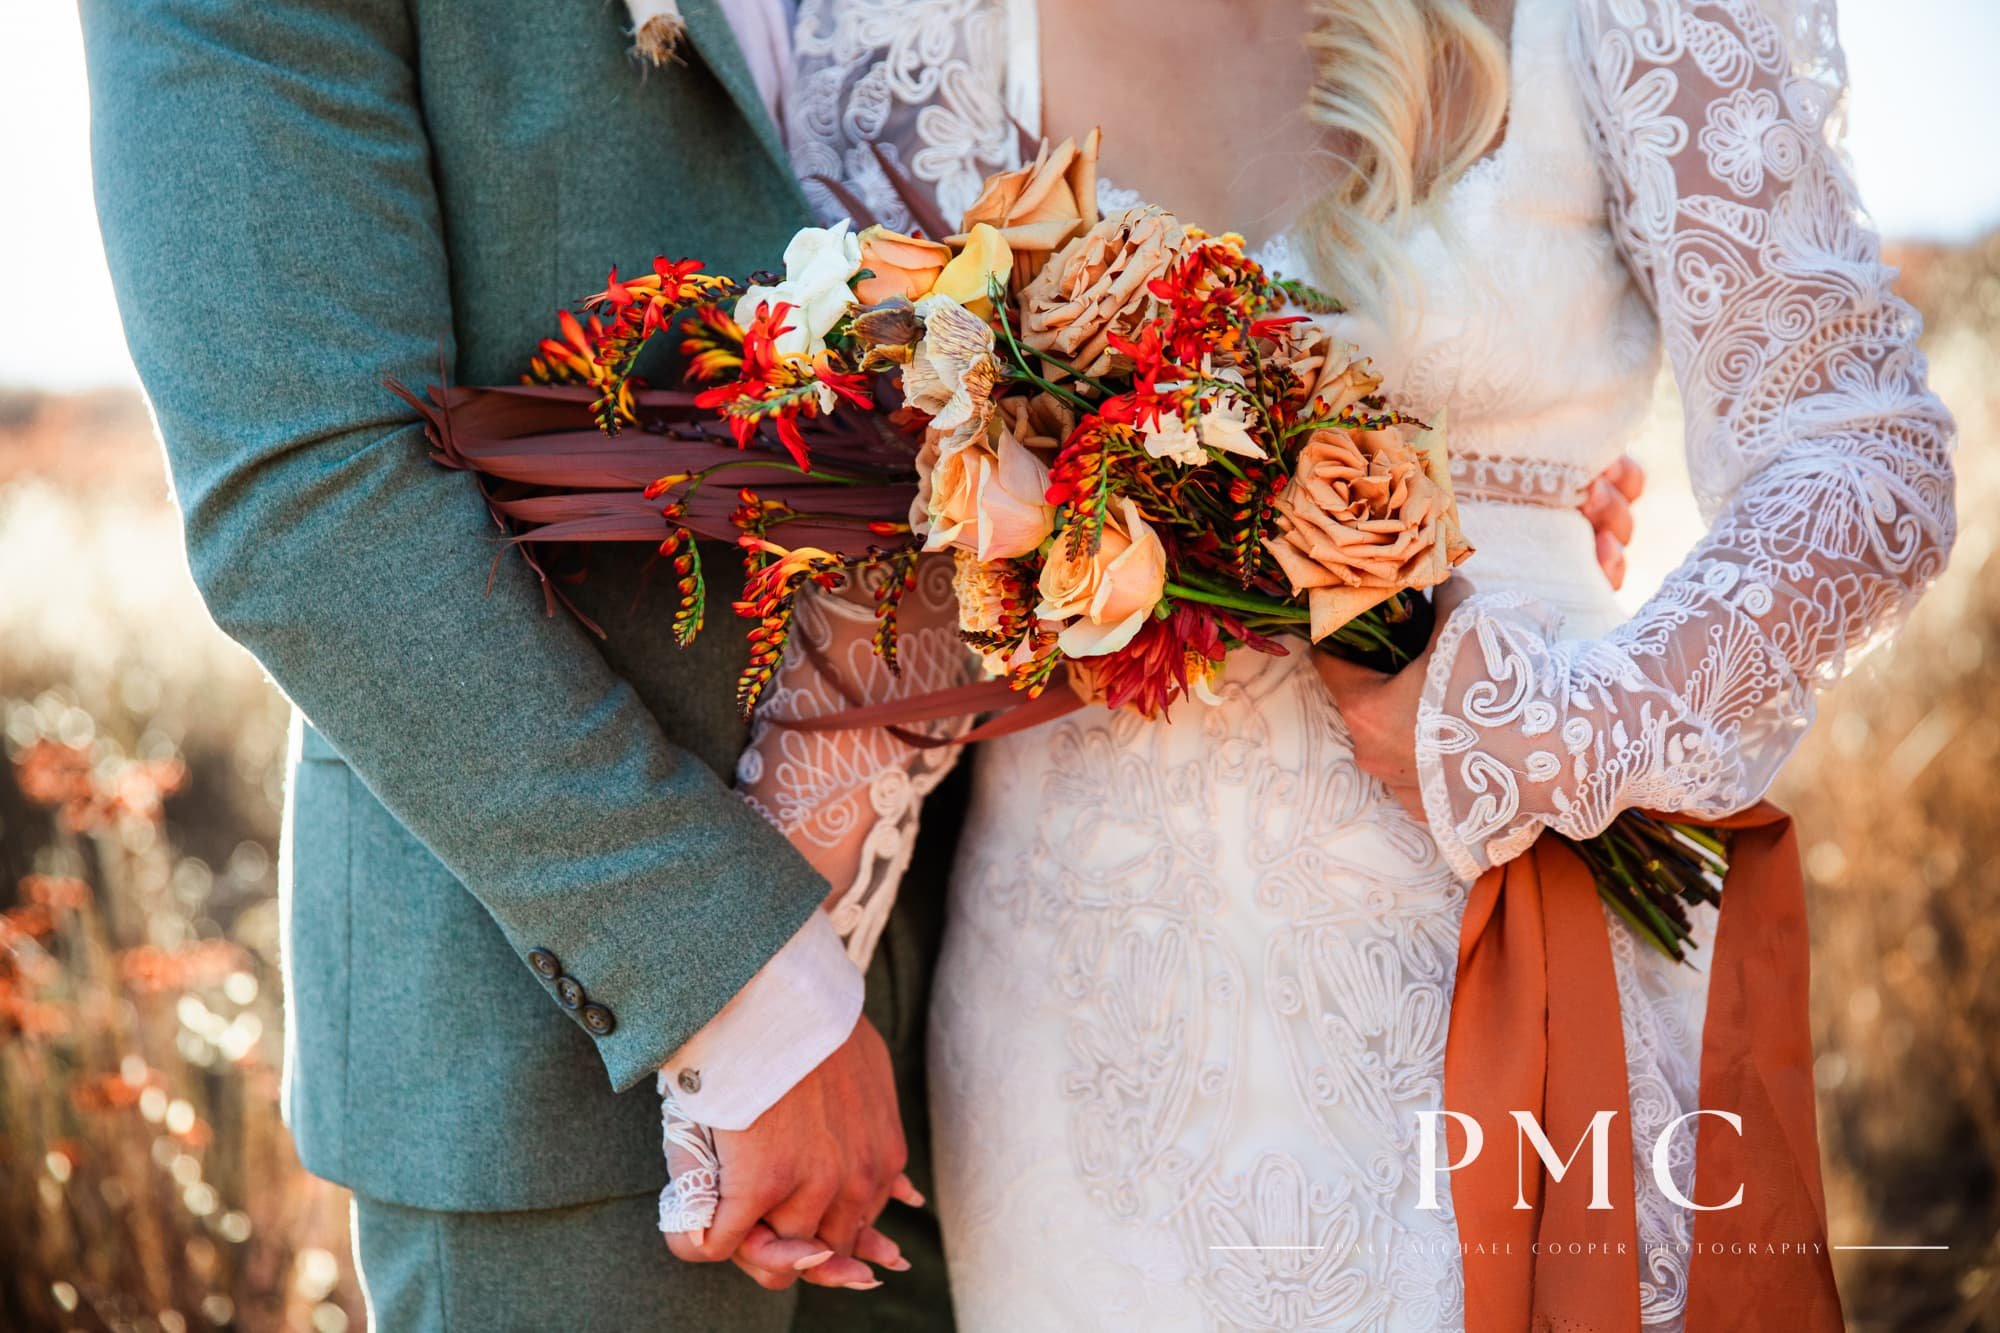 Close-up photo of a bride and groom's hands holding each other and the bride's vibrant floral bouquet.